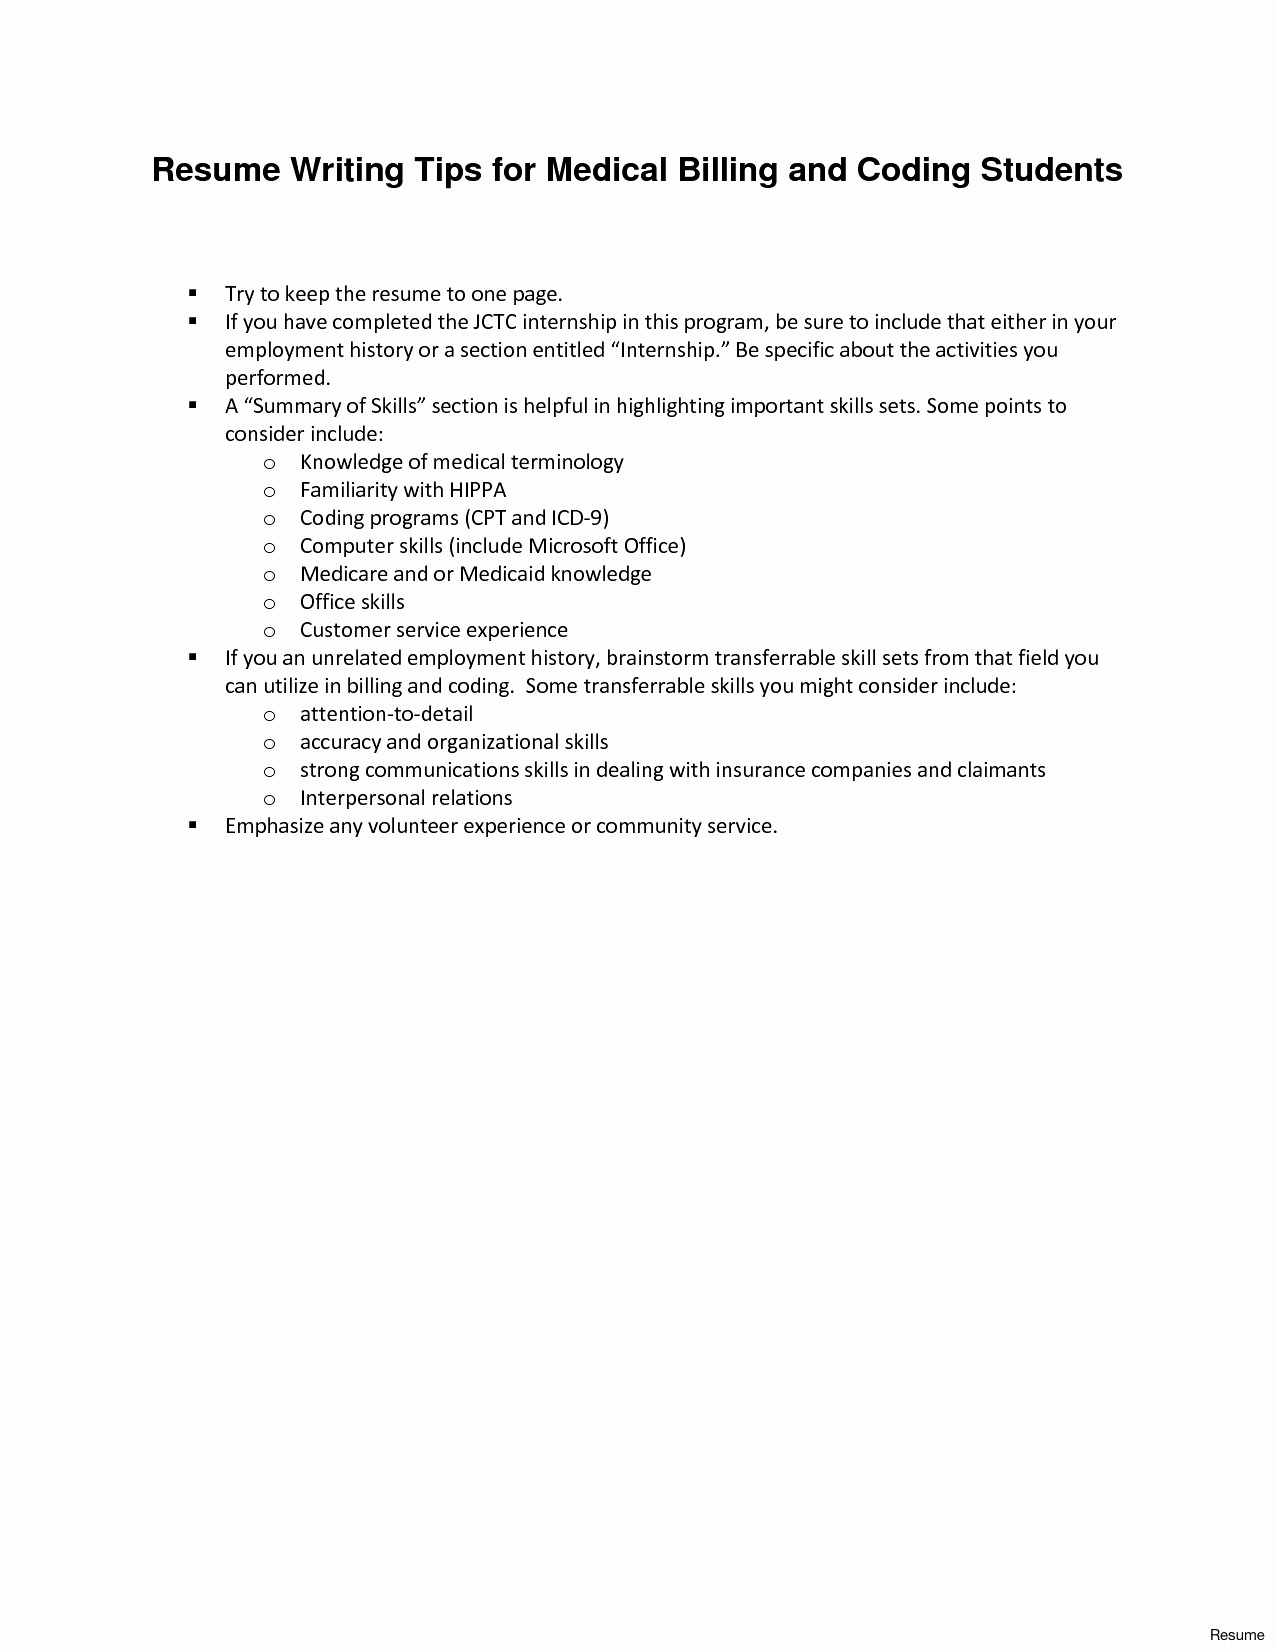 Cover Letter Examples for Medical Billing and Coding